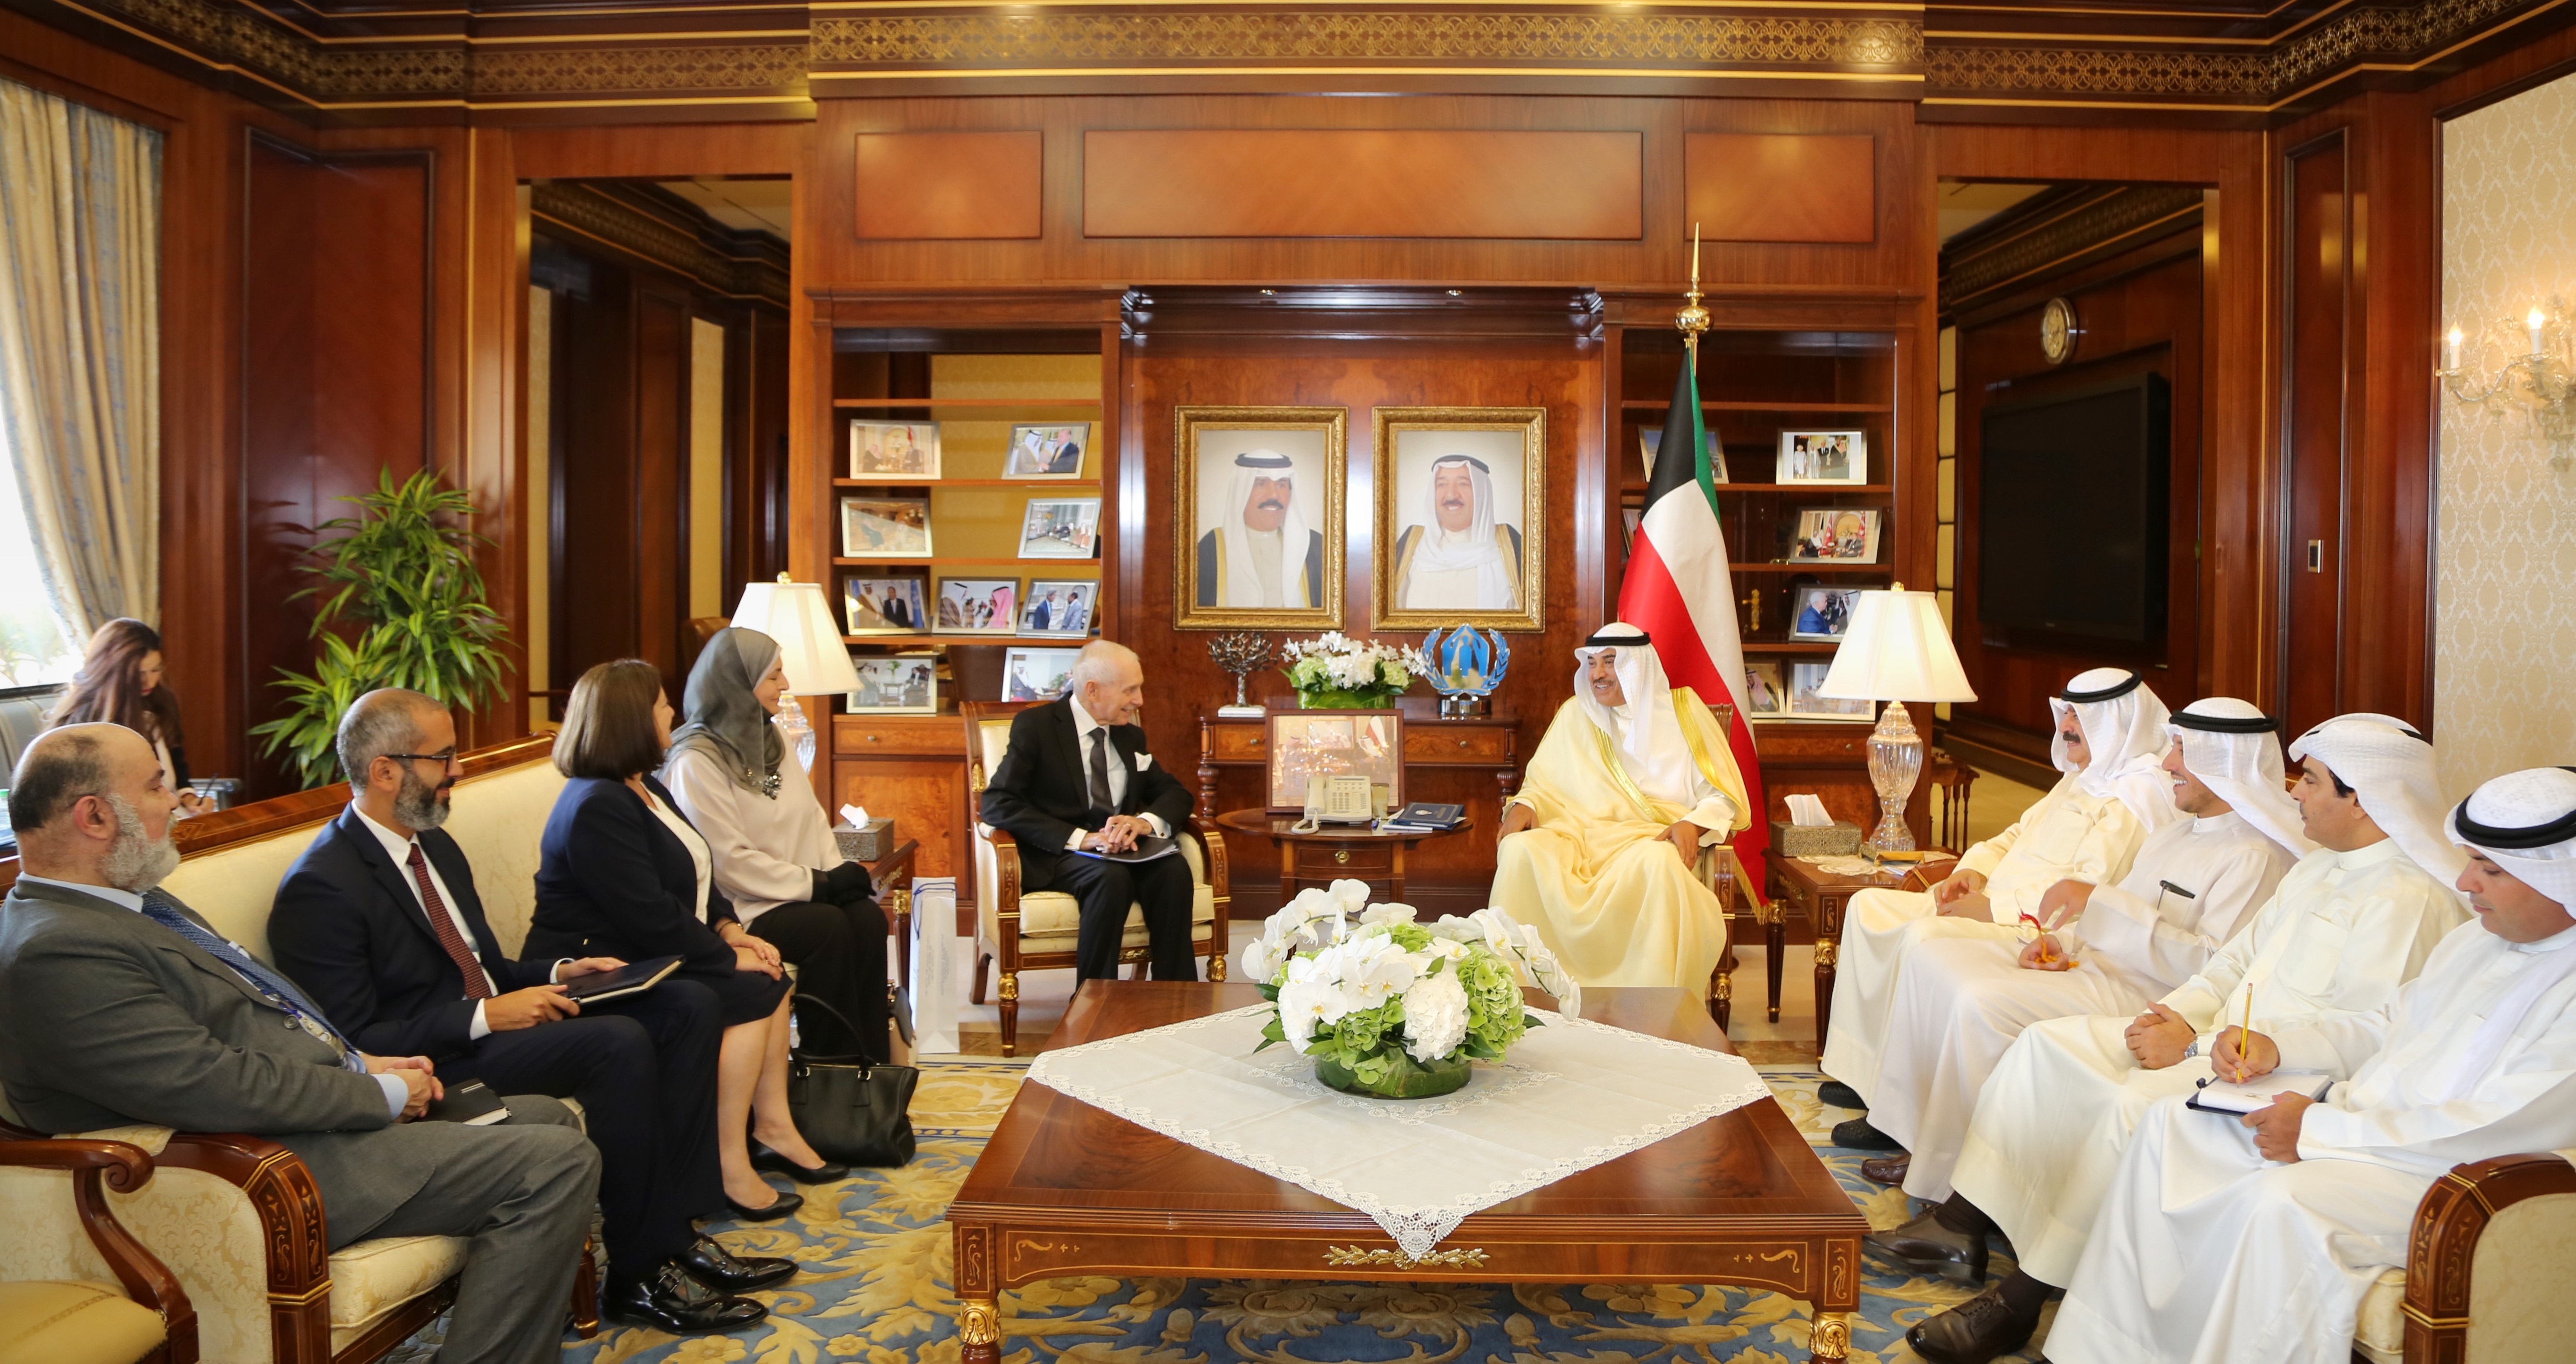 First Deputy Prime Minister and Foreign Minister Sheikh Sabah Al-Khaled Al-Hamad Al-Sabah during his meeting with the International Organization for Migration's Director-General William Lacy Swing